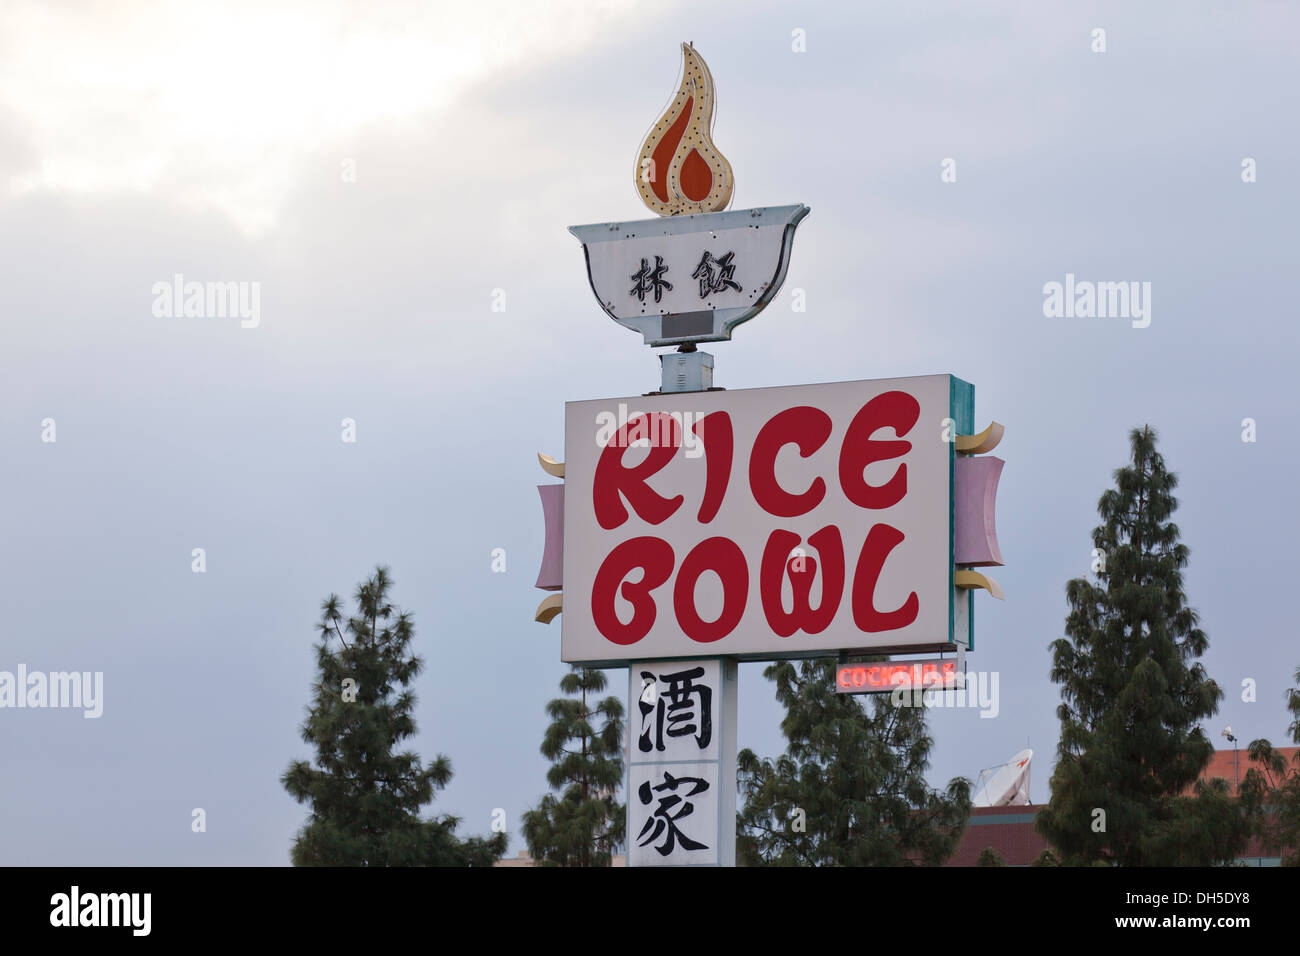 Chinese food restaurant sign Stock Photo